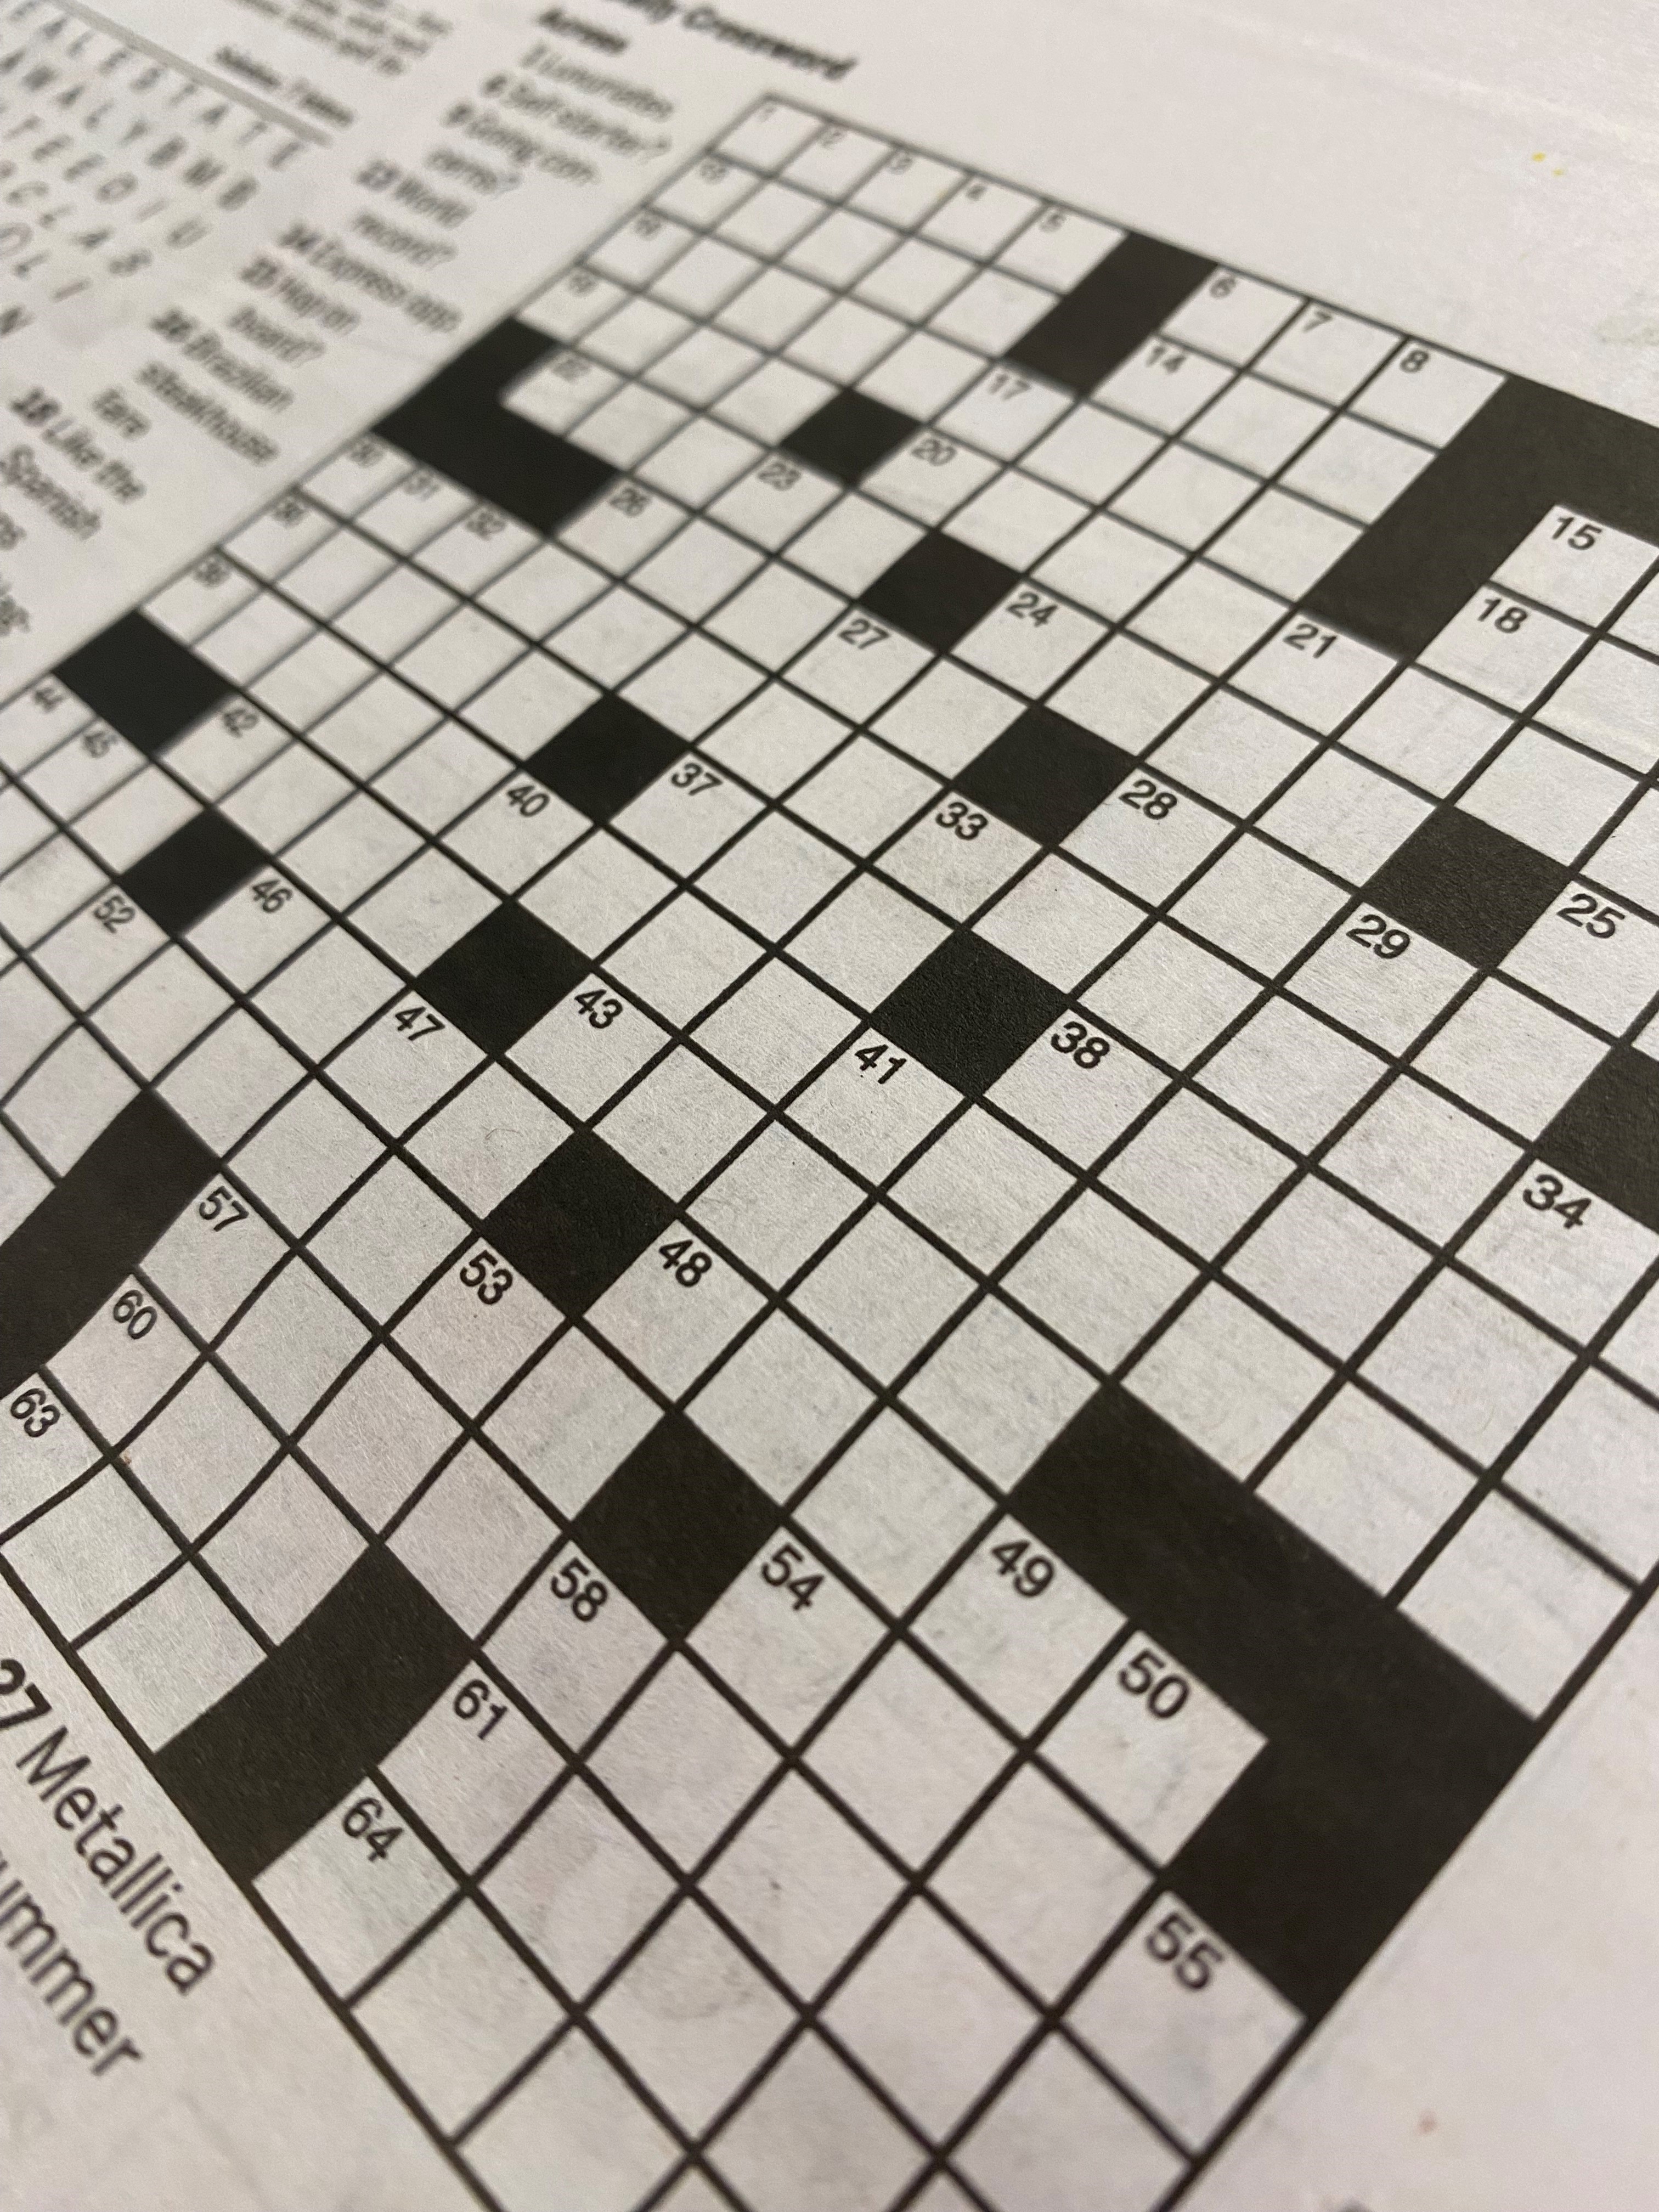 What a Crossword AI Reveals About Humans' Way With Words